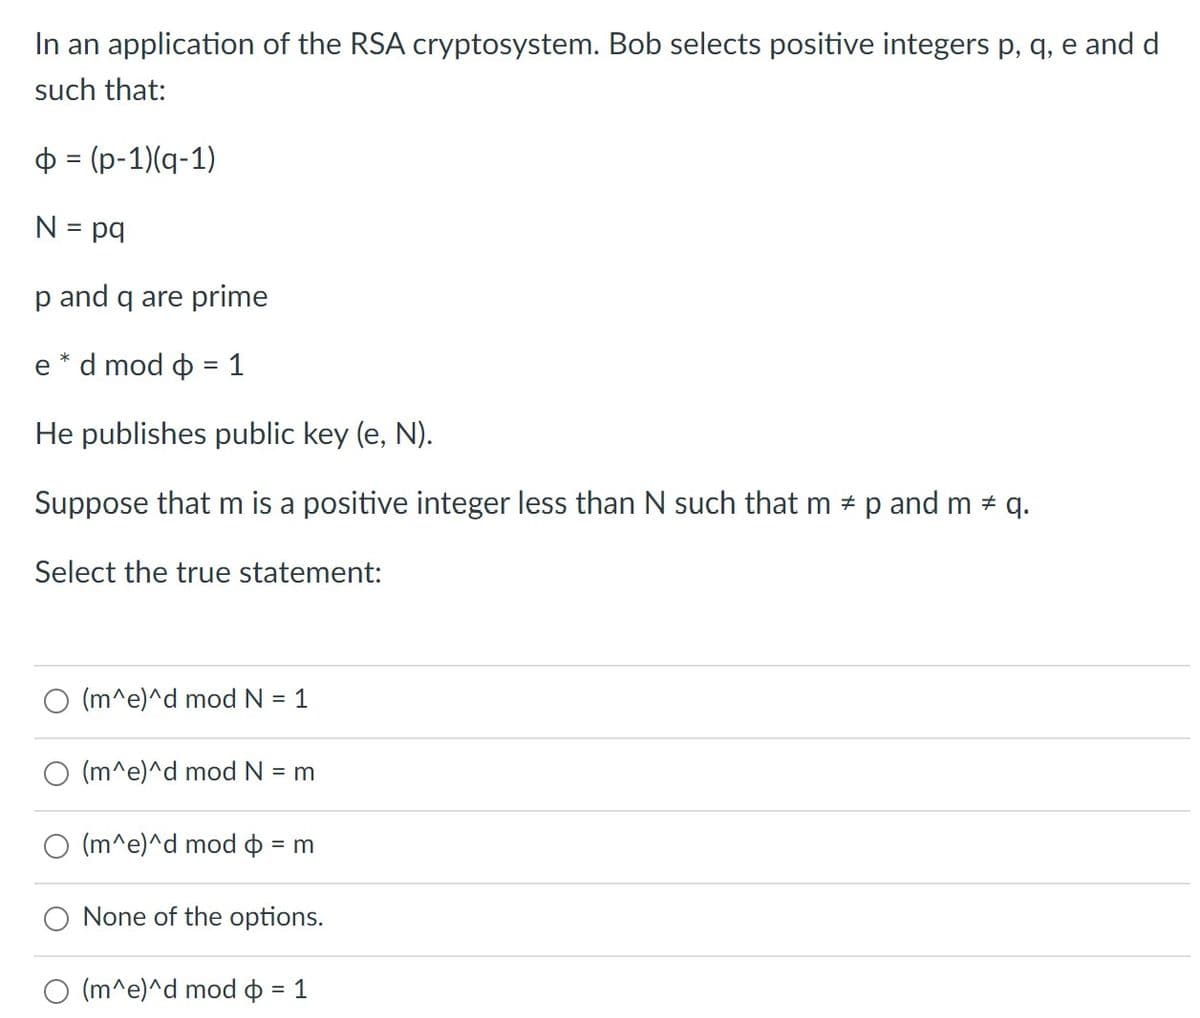 In an application of the RSA cryptosystem. Bob selects positive integers p, q, e and d
such that:
ф% (р-1)(q-1)
N = pq
p and q are prime
e * d mod o = 1
He publishes public key (e, N).
Suppose that m is a positive integer less than N such that m # p and m # q.
Select the true statement:
(m^e)^d mod N = 1
(m^e)^d mod N = m
(m^e)^d mod o = m
%3D
None of the options.
(m^e)^d mod o = 1
